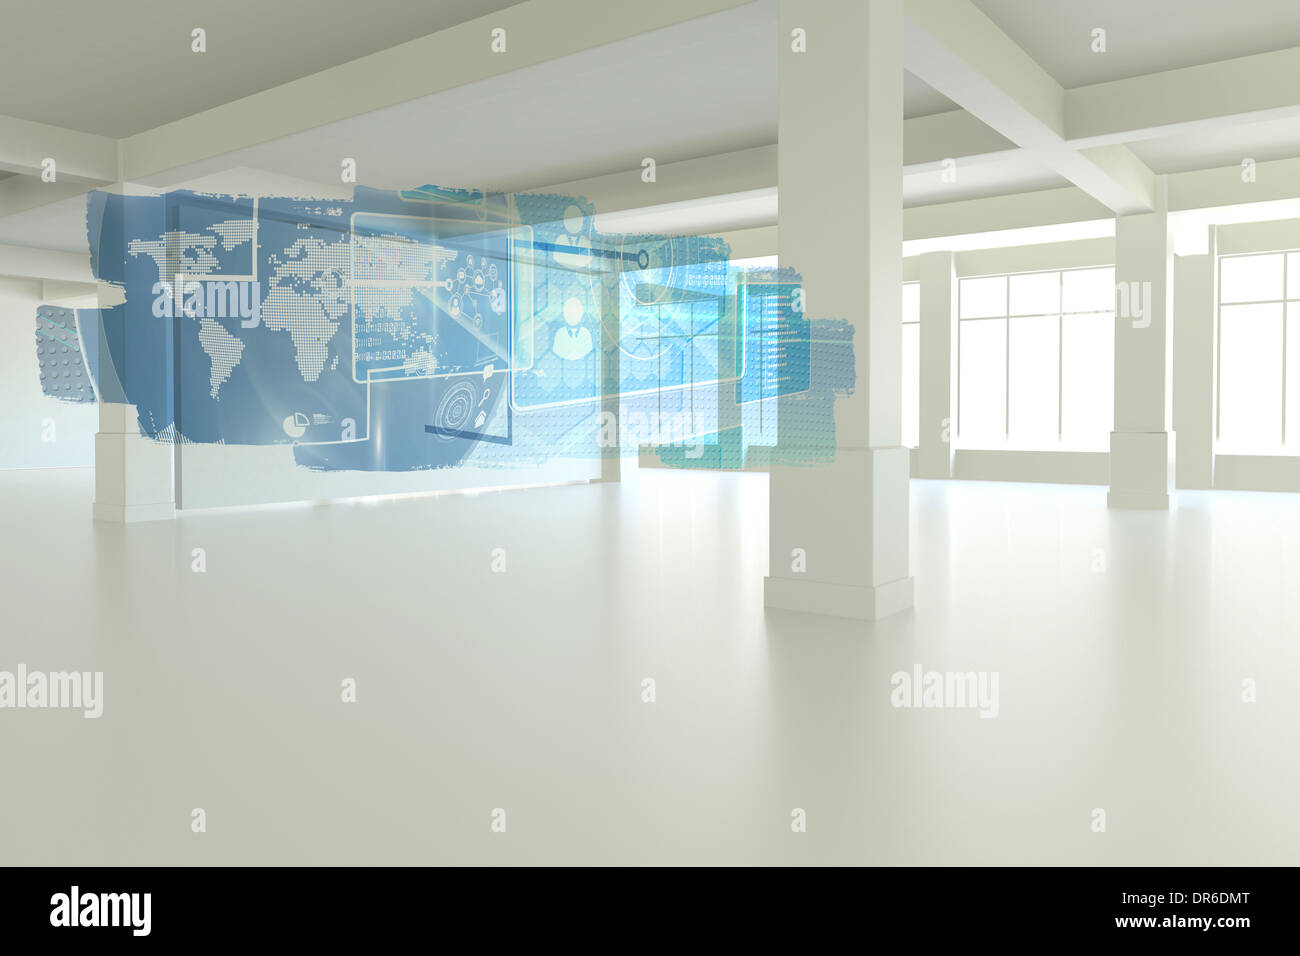 Abstract screen in room showing global communication Stock Photo